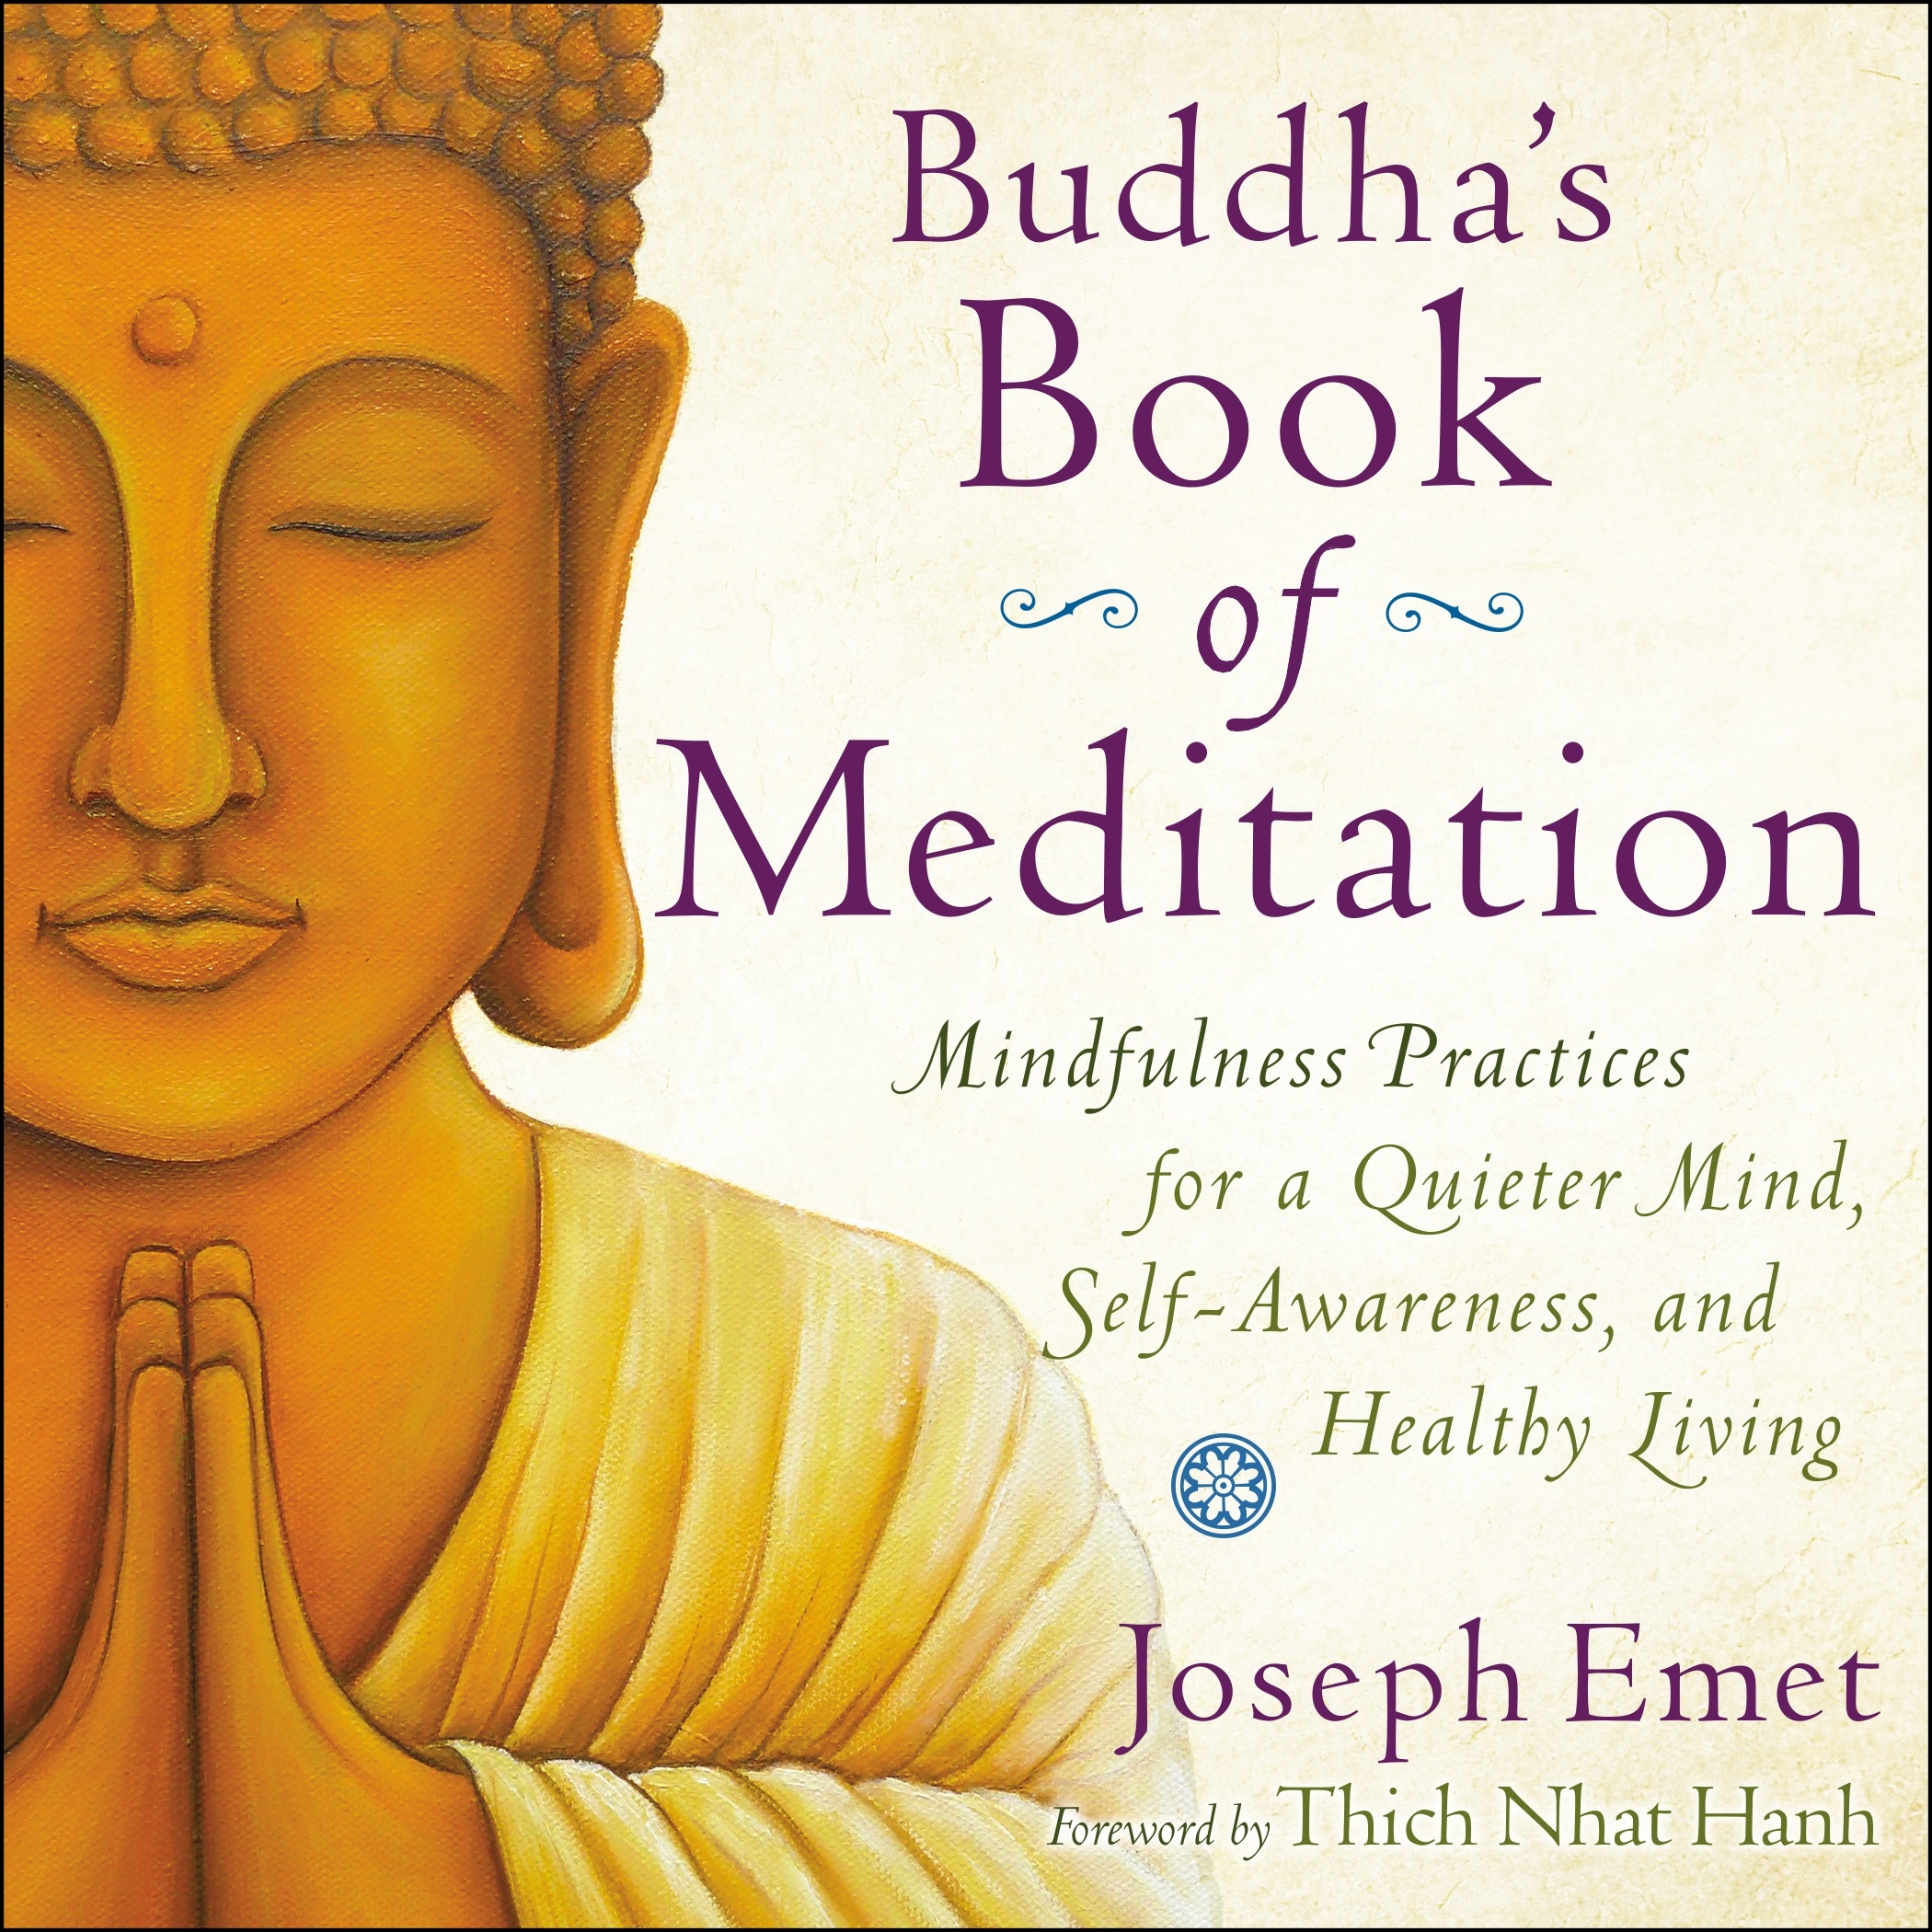 Buddha's Book of Meditation: Mindfulness Practices for a Quieter Mind,  Self-Awarness, and Healthy Living by Joseph Emet - Penguin Books Australia